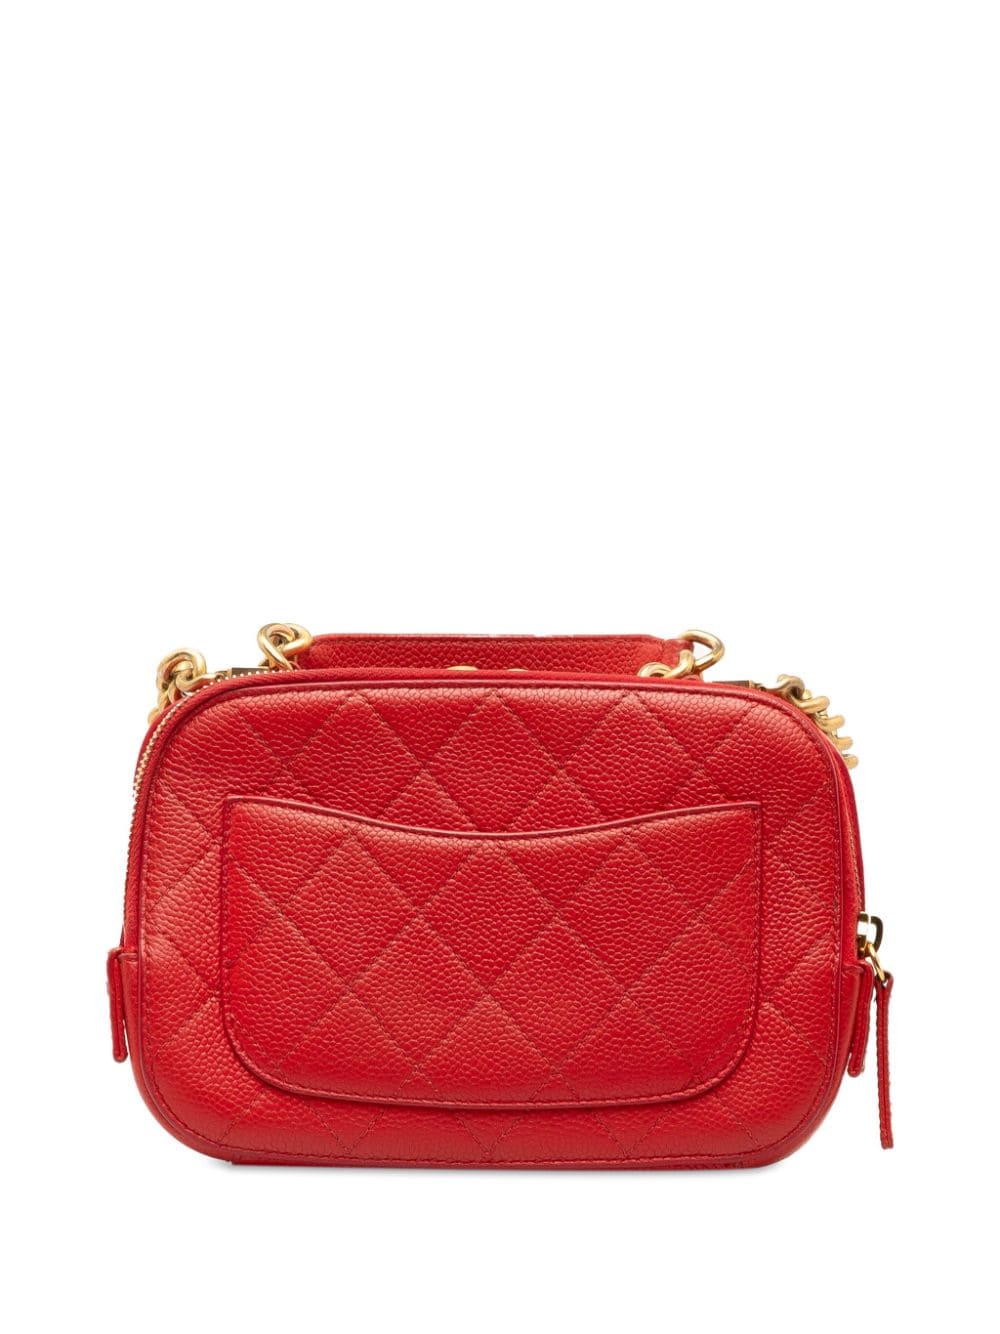 CHANEL Pre-Owned 2019 Small Quilted Caviar Top Handle Camera Bag satchel - Rood